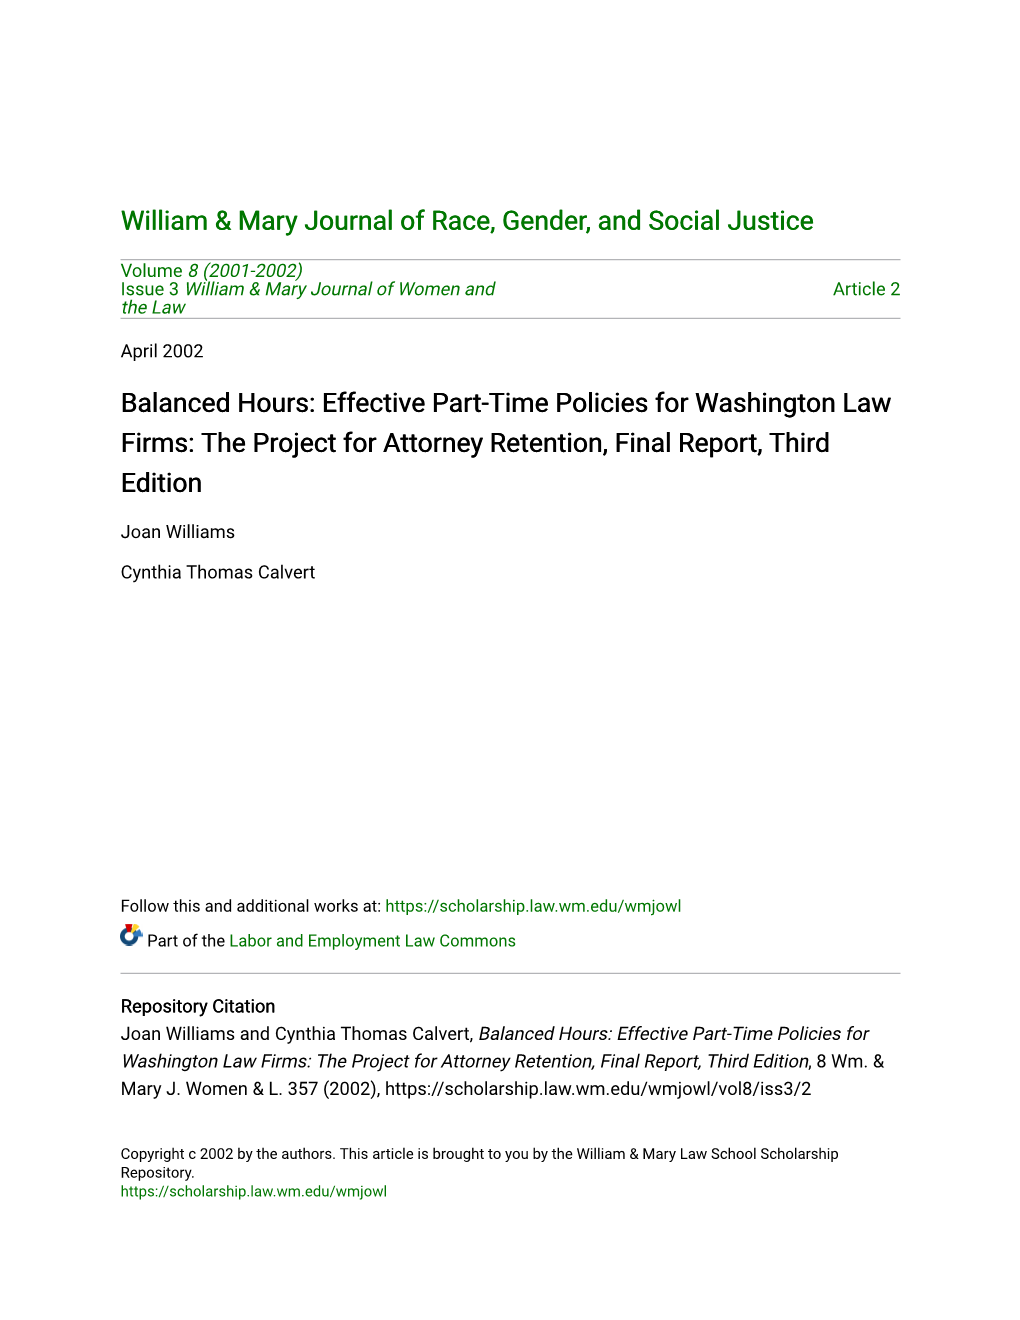 Balanced Hours: Effective Part-Time Policies for Washington Law Firms: the Project for Attorney Retention, Final Report, Third Edition